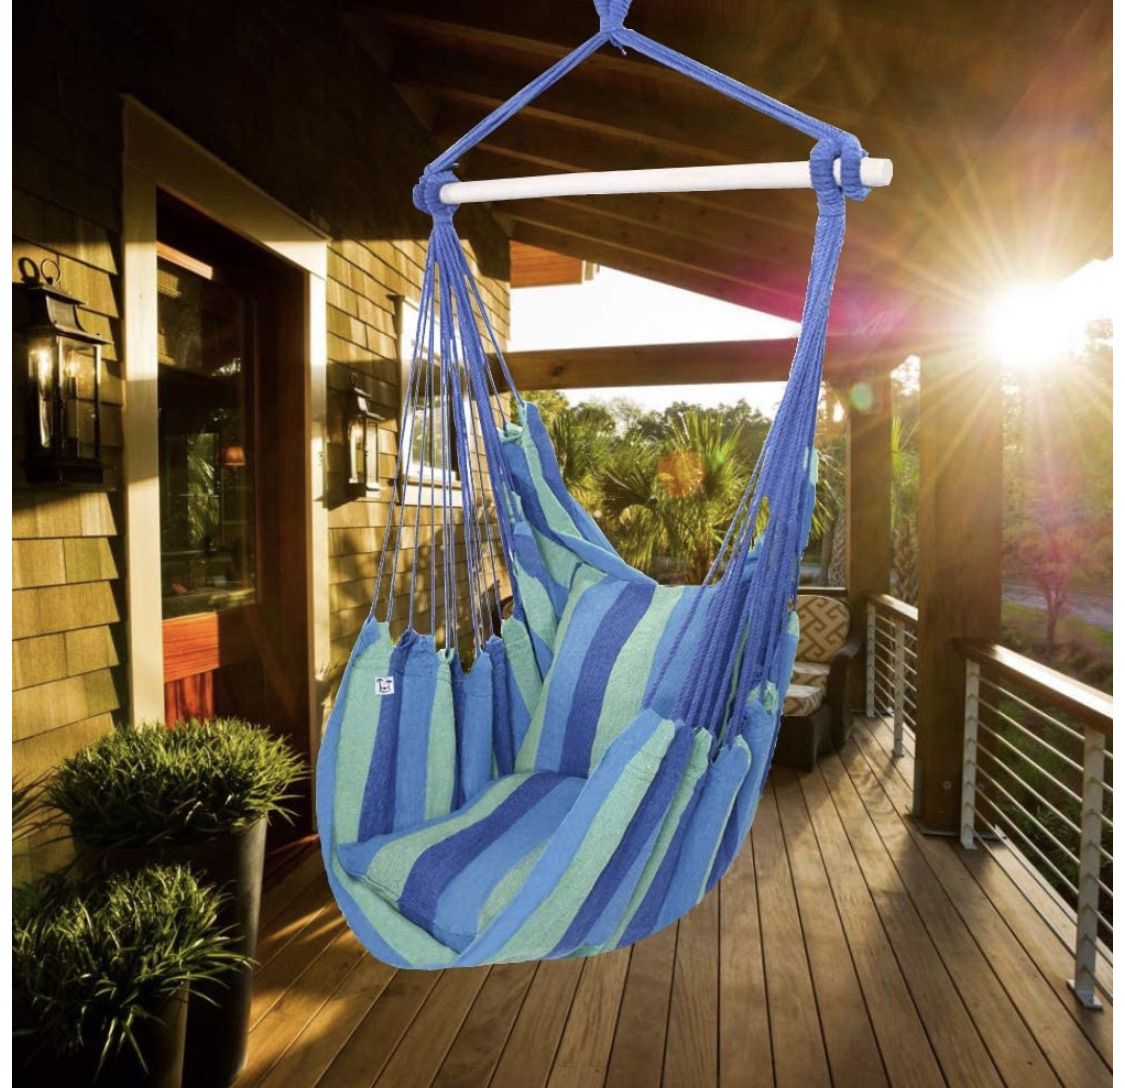 ONCLOUD Hanging Rope Hammock Chair Swing Seat for Yard, Bedroom, Patio, Porch, Indoor/Outdoor - 2 Seat Cushions Included (Blue)